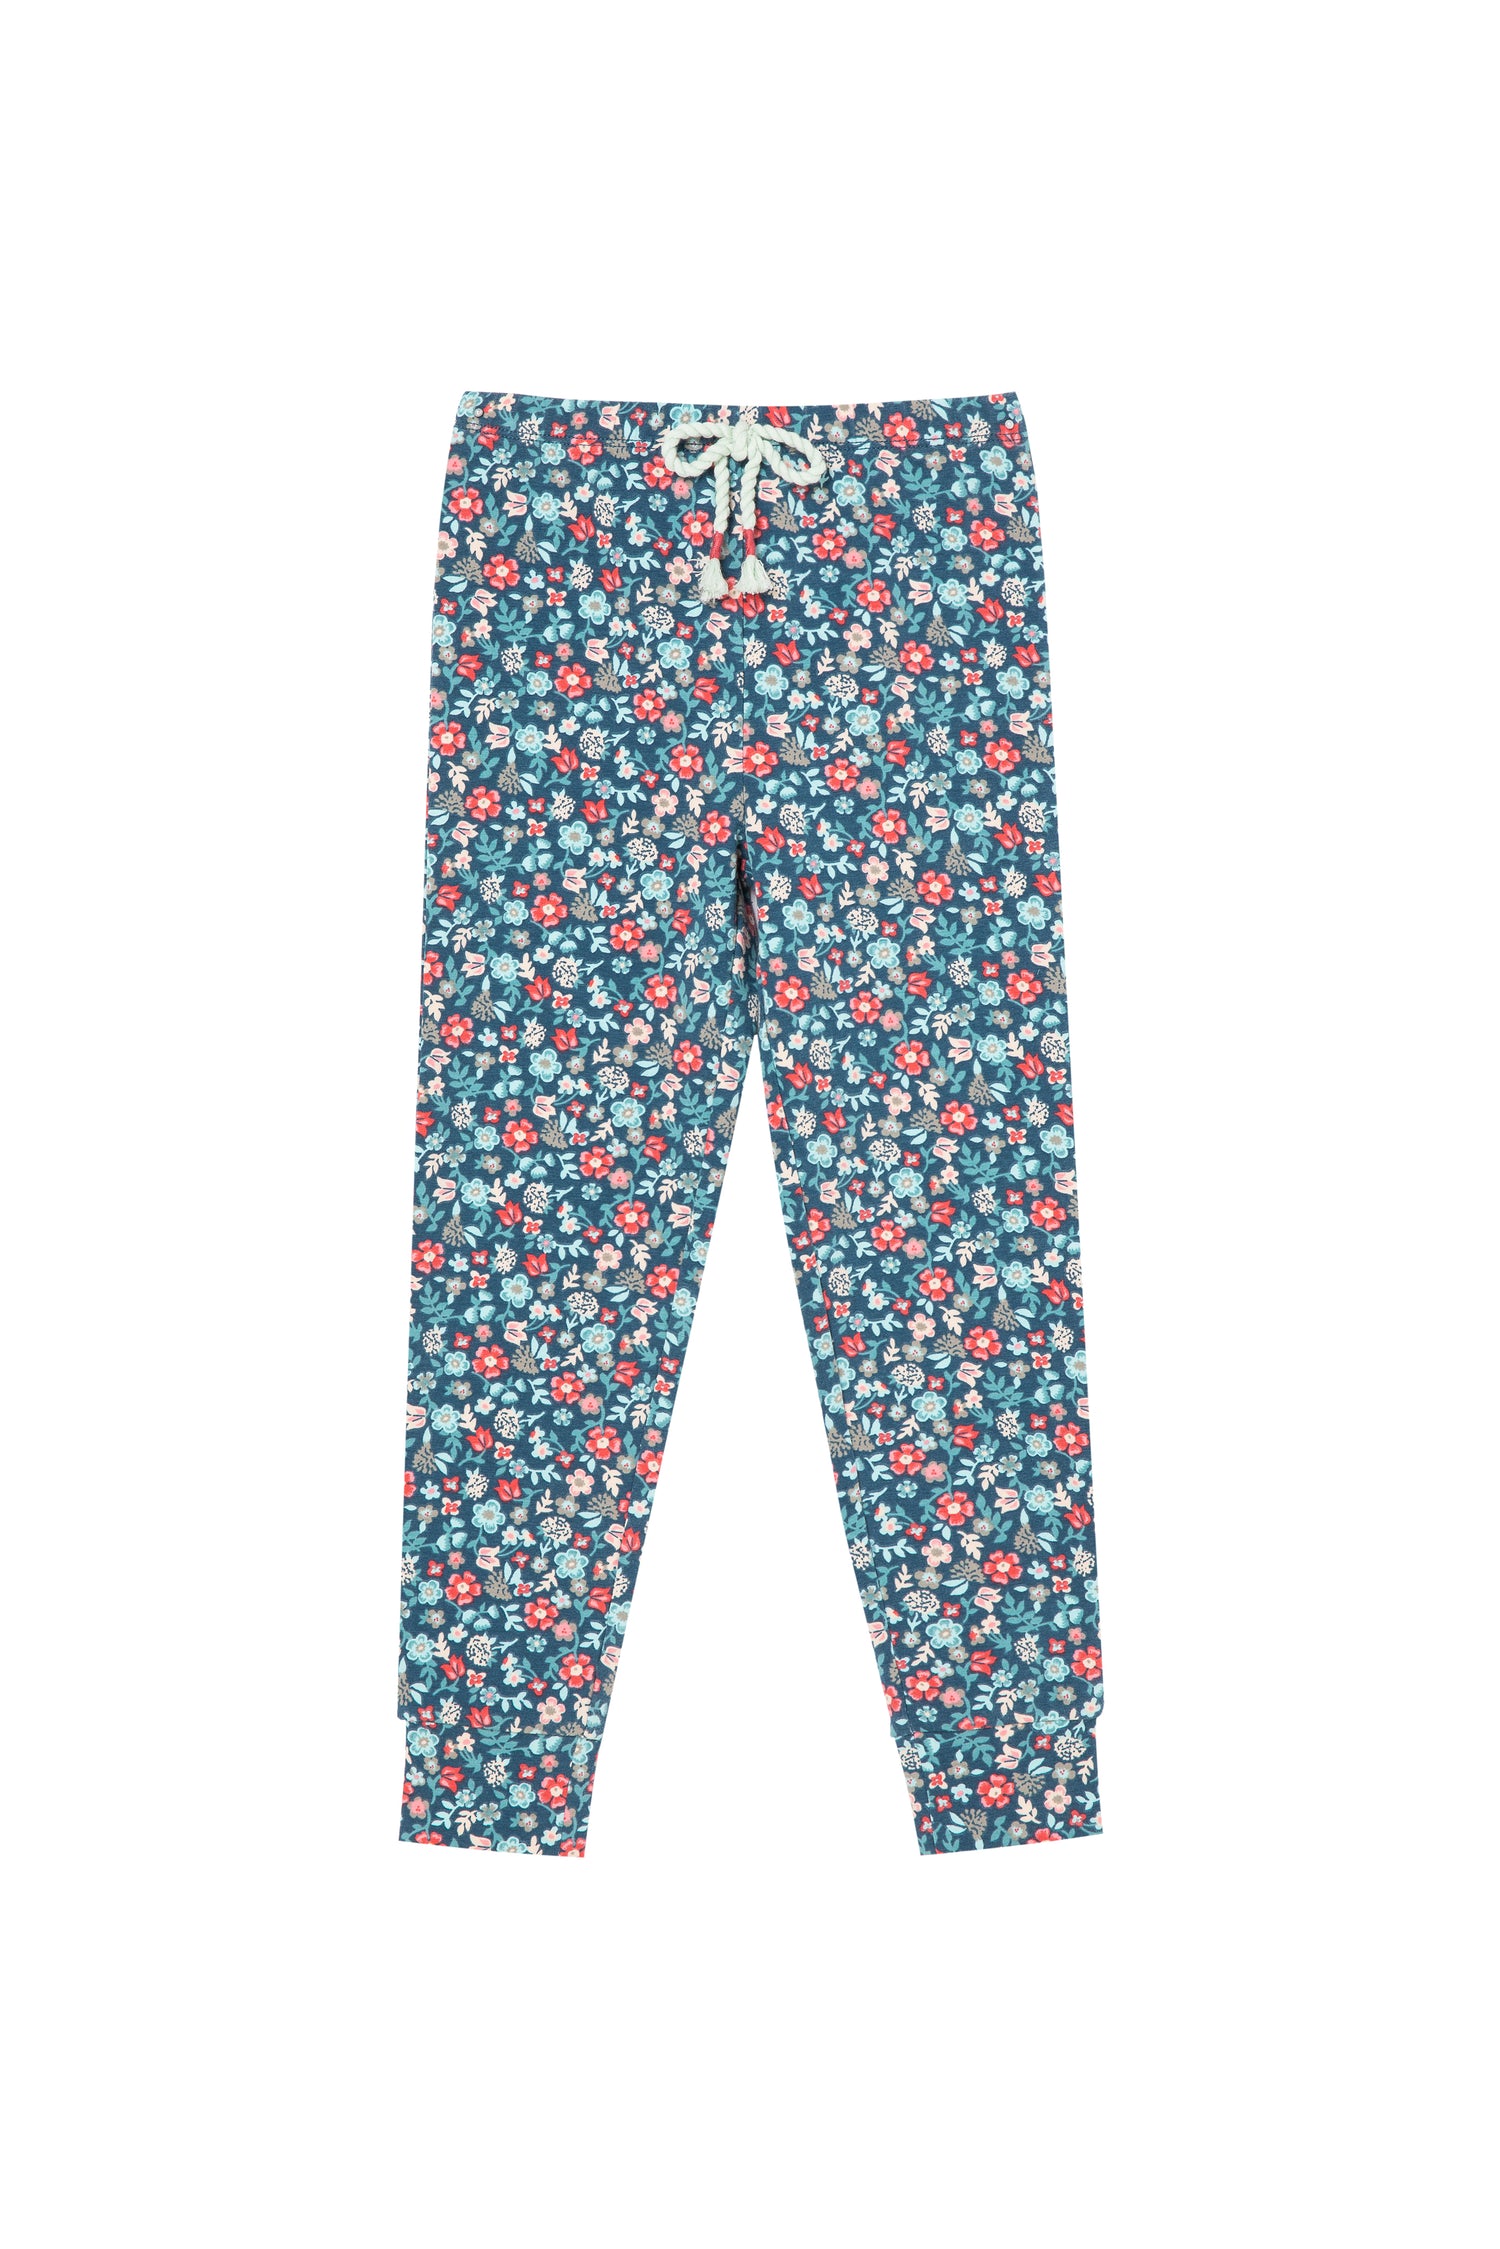 Blue, white, pink and red floral print legging with tassels